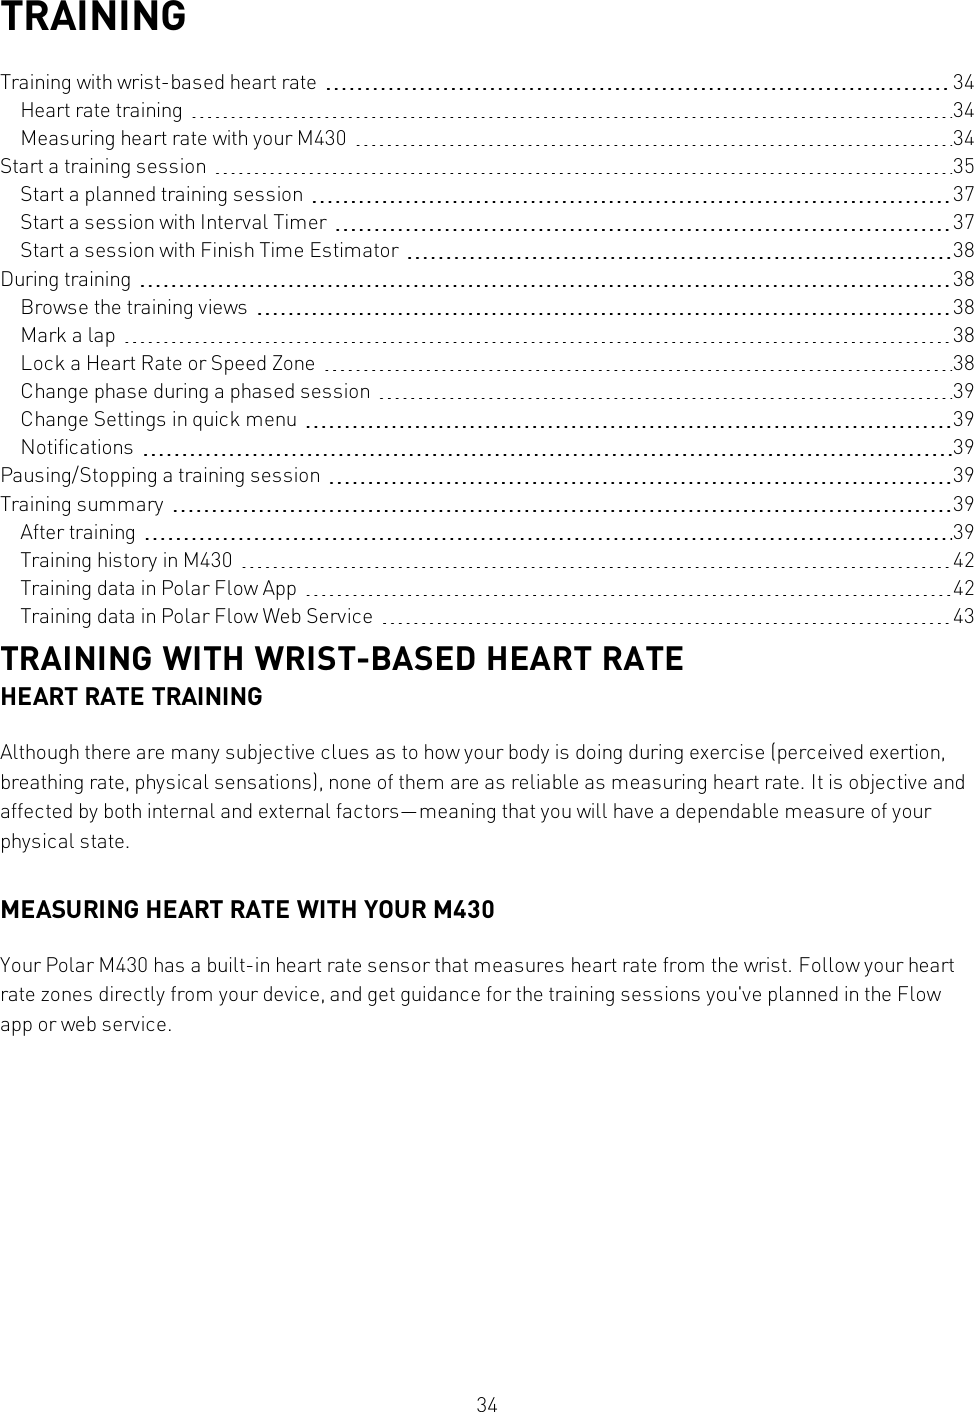 34TRAININGTraining with wrist-based heart rate 34Heart rate training 34Measuring heart rate with your M430 34Start a training session 35Start a planned training session 37Start a session with Interval Timer 37Start a session with Finish Time Estimator 38During training 38Browse the training views 38Mark a lap 38Lock a Heart Rate or Speed Zone 38Change phase during a phased session 39Change Settings in quick menu 39Notifications 39Pausing/Stopping a training session 39Training summary 39After training 39Training history in M430 42Training data in Polar Flow App 42Training data in Polar Flow Web Service 43TRAINING WITH WRIST-BASED HEART RATEHEART RATE TRAININGAlthough there are many subjective clues as to how your body is doing during exercise (perceived exertion,breathing rate, physical sensations), none of them are as reliable as measuring heart rate. It is objective andaffected by both internal and external factors—meaning that you will have a dependable measure of yourphysical state.MEASURING HEART RATE WITH YOUR M430Your Polar M430 has a built-in heart rate sensor that measures heart rate from the wrist. Follow your heartrate zones directly from your device, and get guidance for the training sessions you&apos;ve planned in the Flowapp or web service.